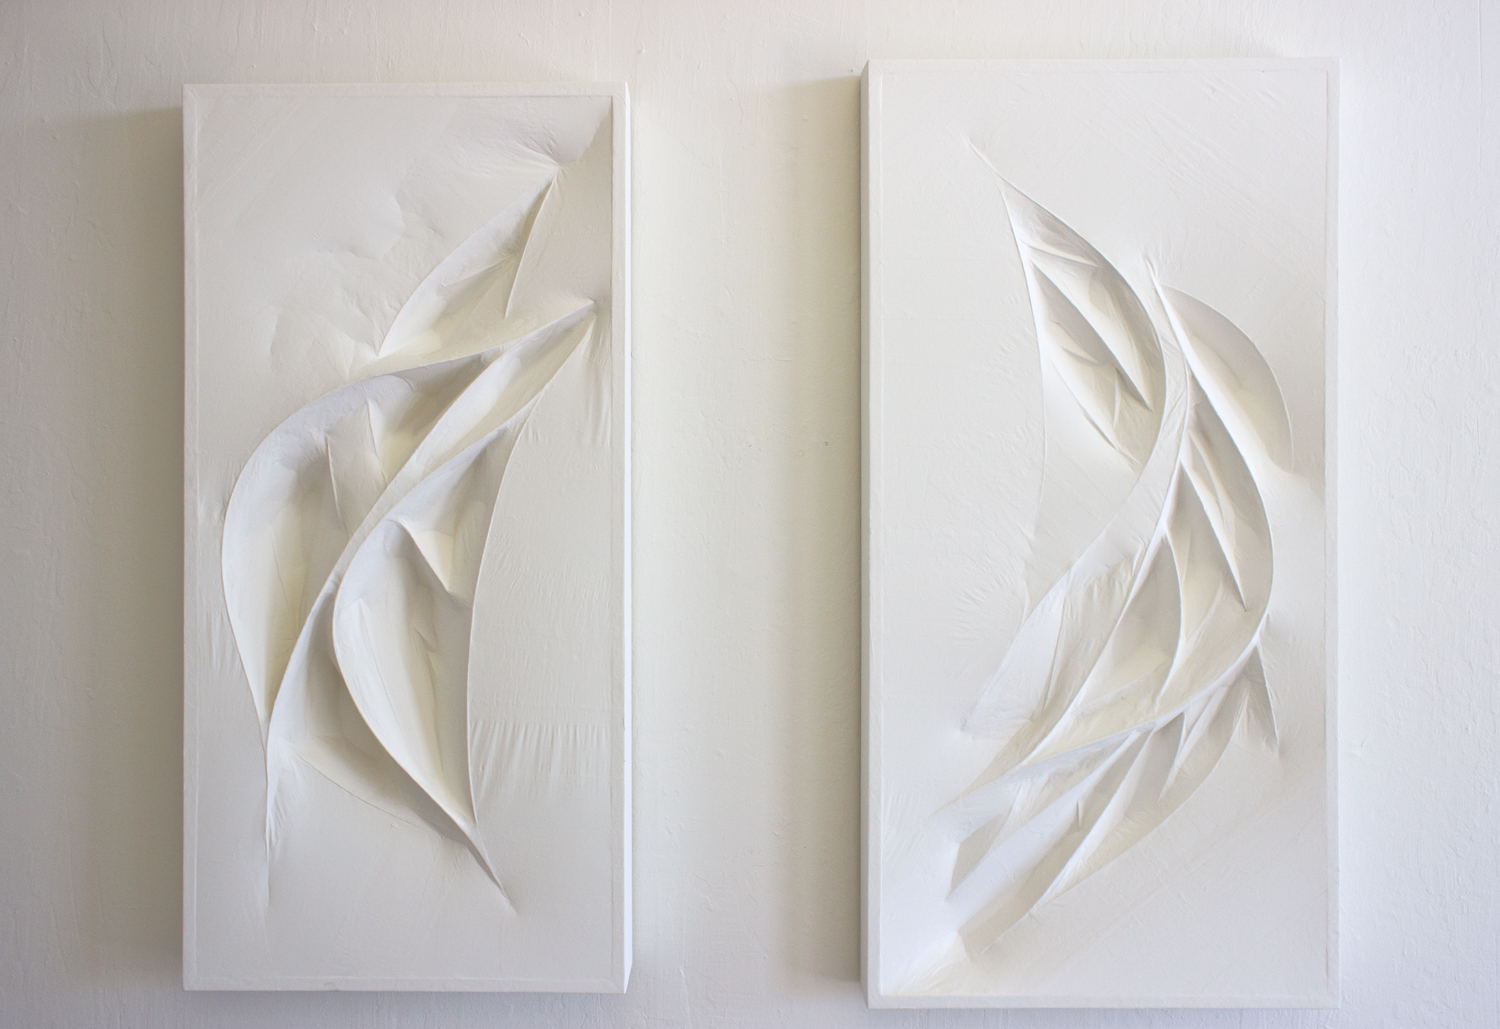  Untitled 1 &amp; 2 (white forms)  2015  Wood panel, wood forms, and paper mache (white tracing paper with gallery white paint)  45 x 23.5 x 4 inches,&nbsp;47.5 x 23.5 x 3 inches 